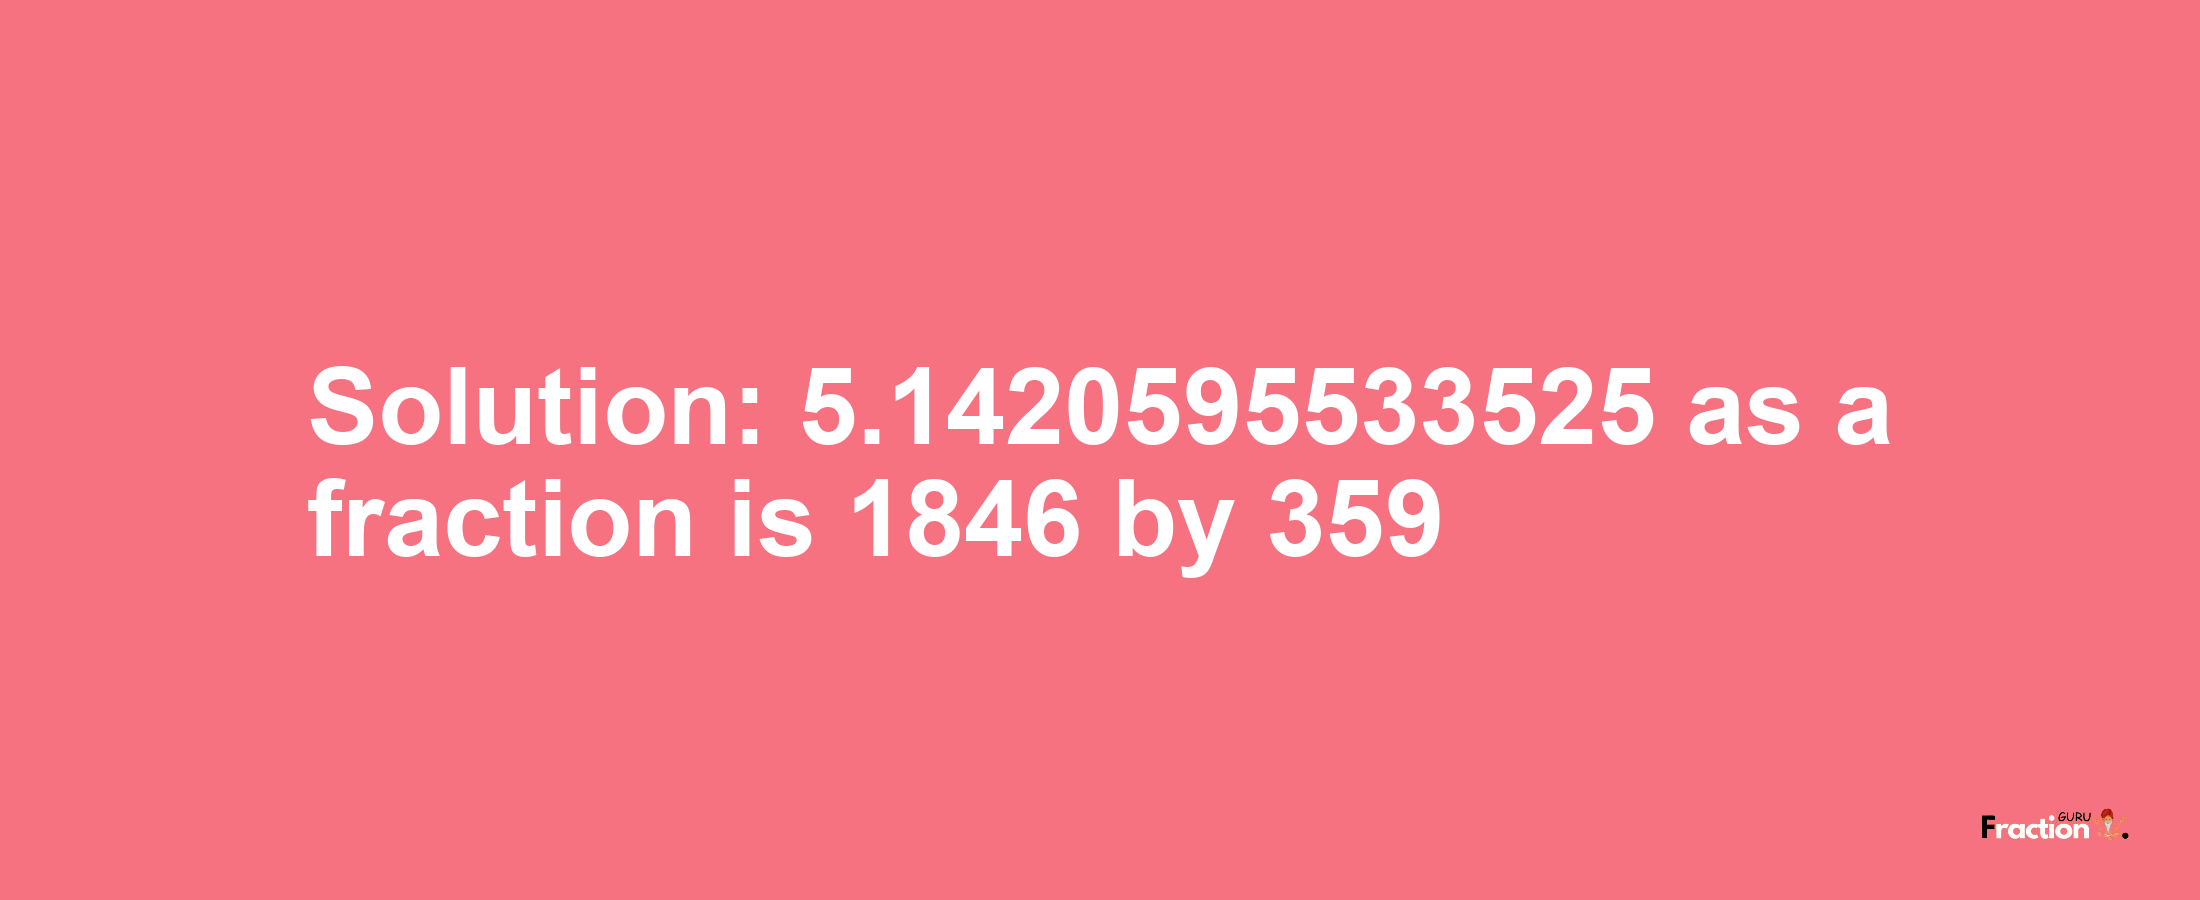 Solution:5.1420595533525 as a fraction is 1846/359